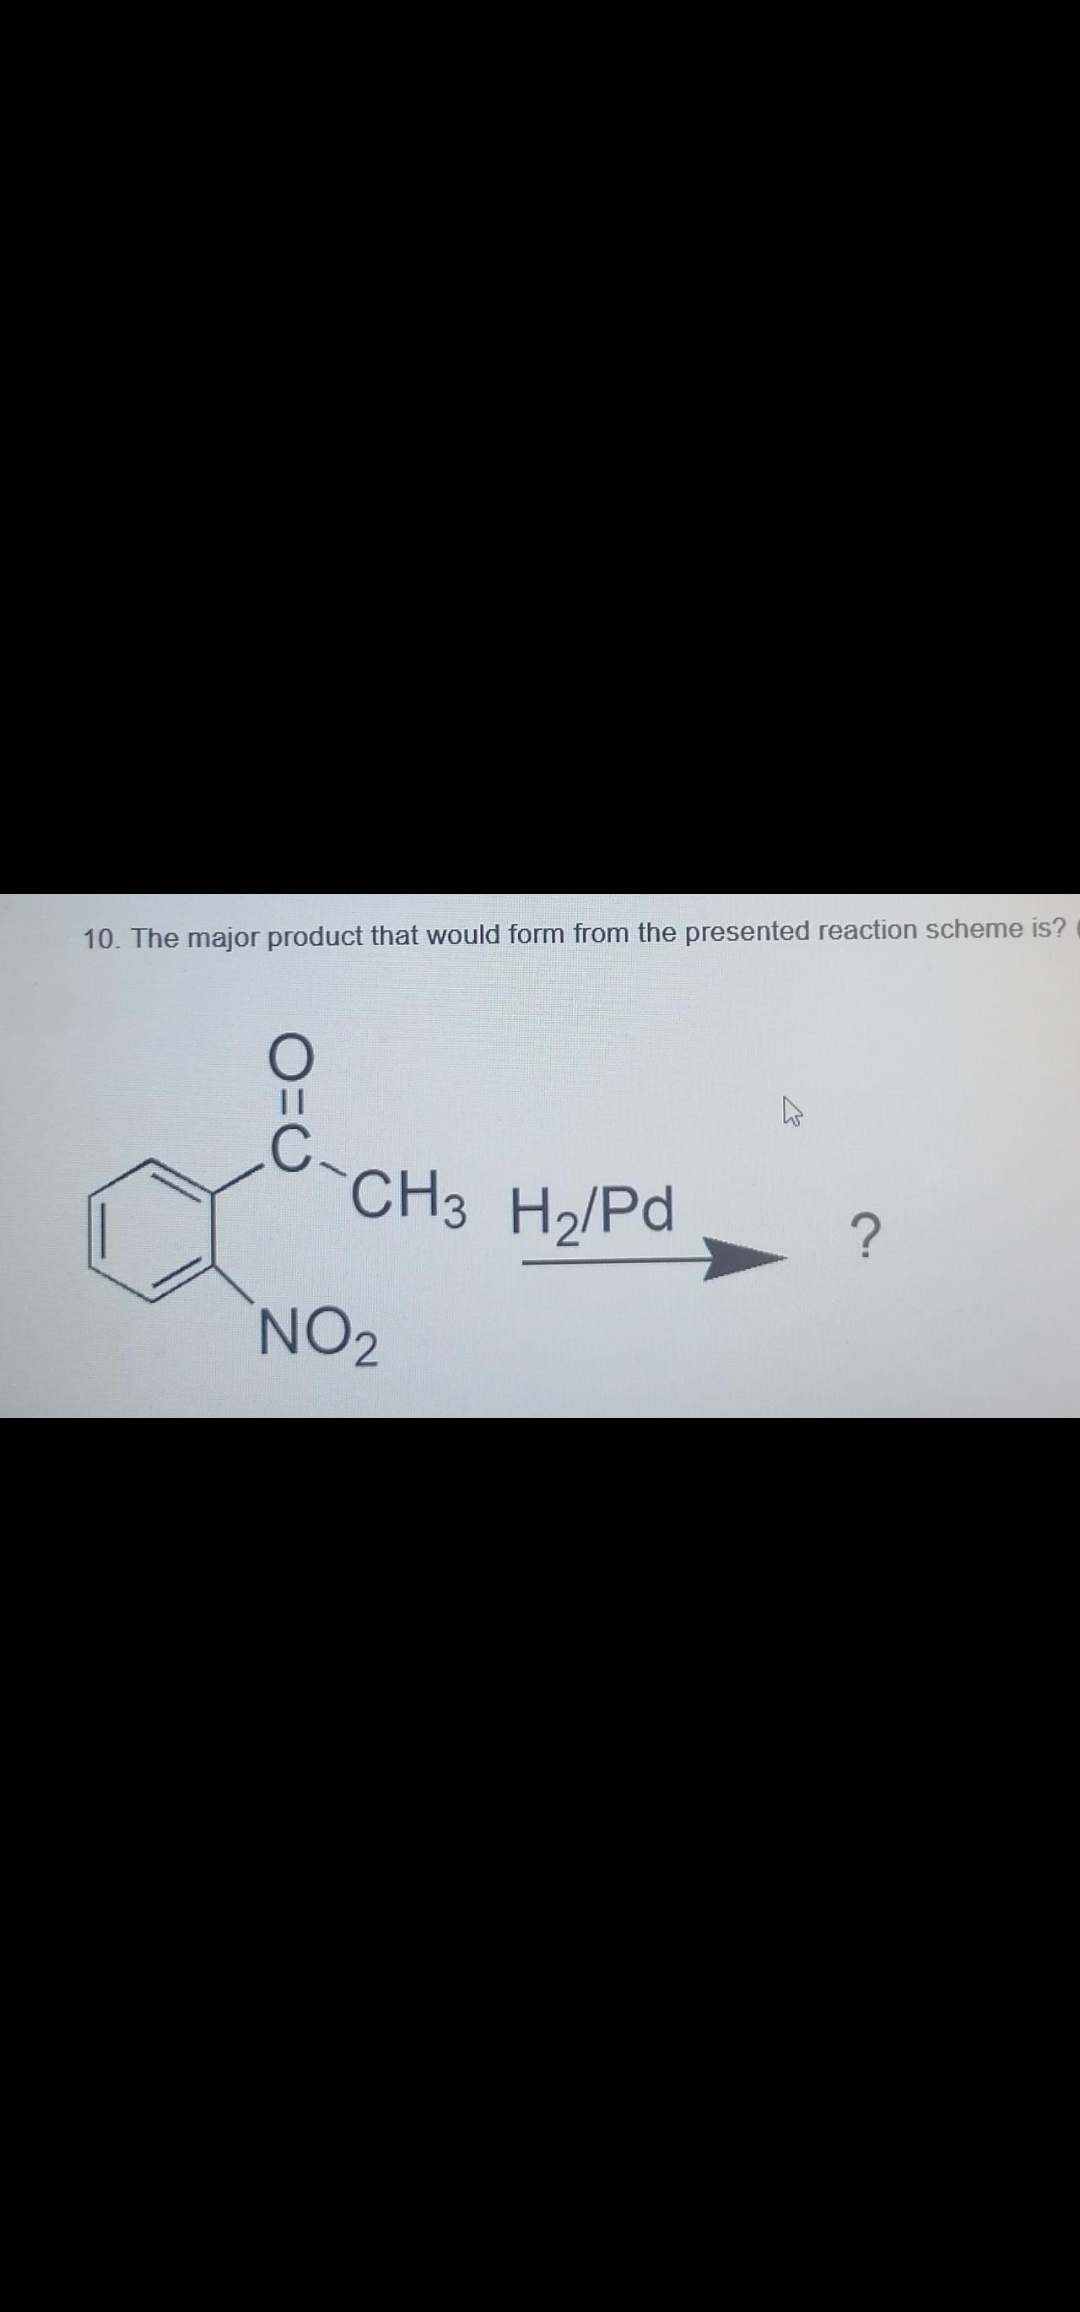 10. The major product that would form from the presented reaction scheme is?
CH3 H2/Pd
NO2
